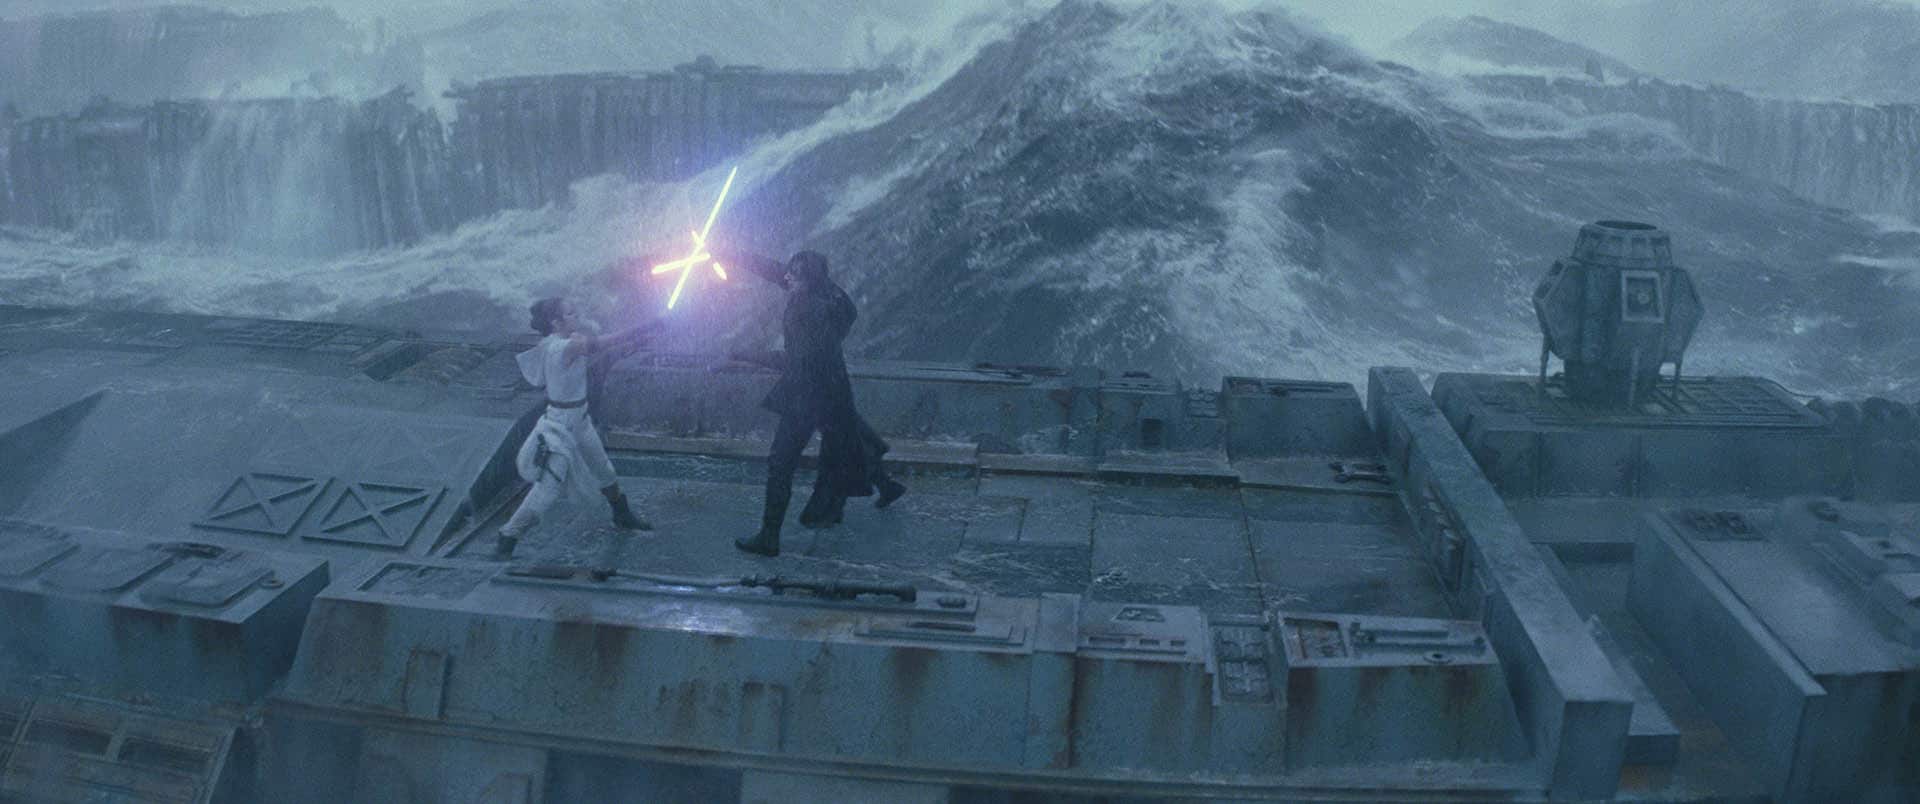 Rey and Kylo fighting on the Death Star